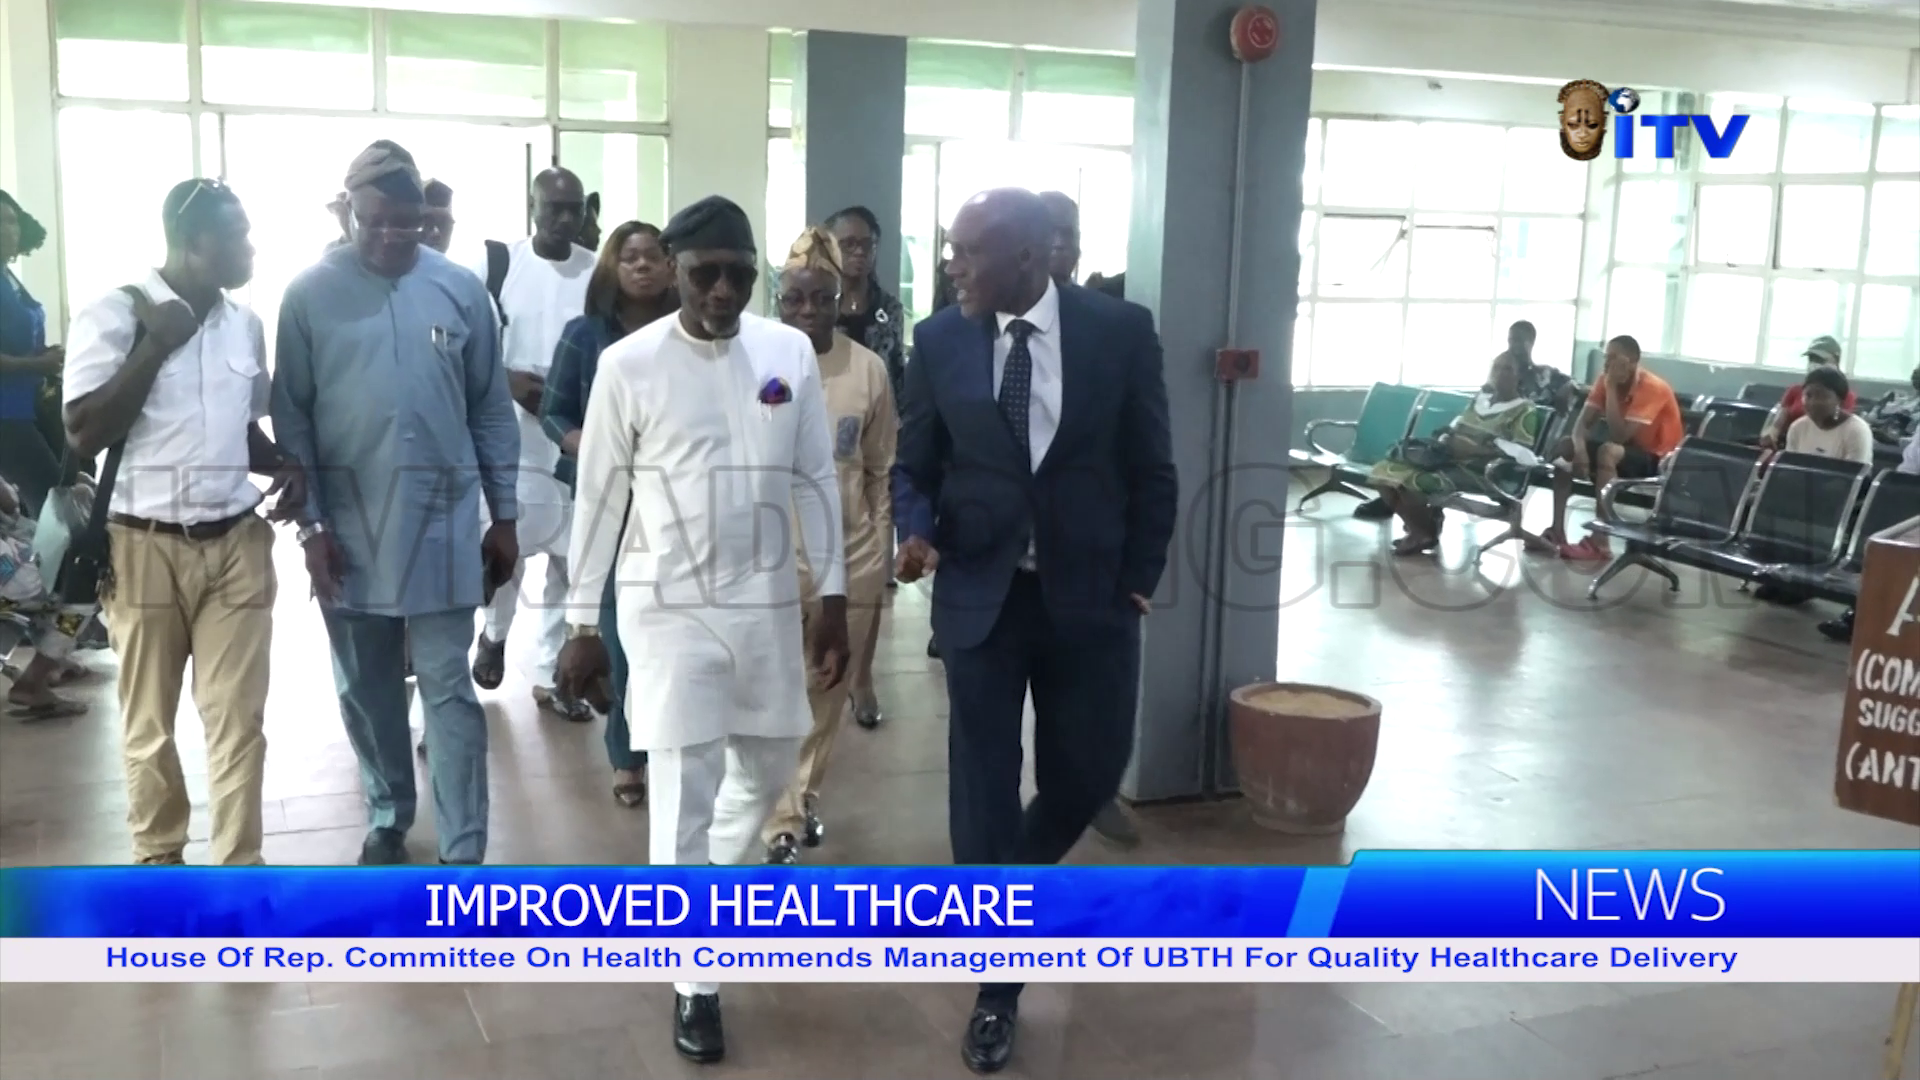 House Of Rep. Committee On Health Commends Management Of UBTH For Quality Healthcare Delivery